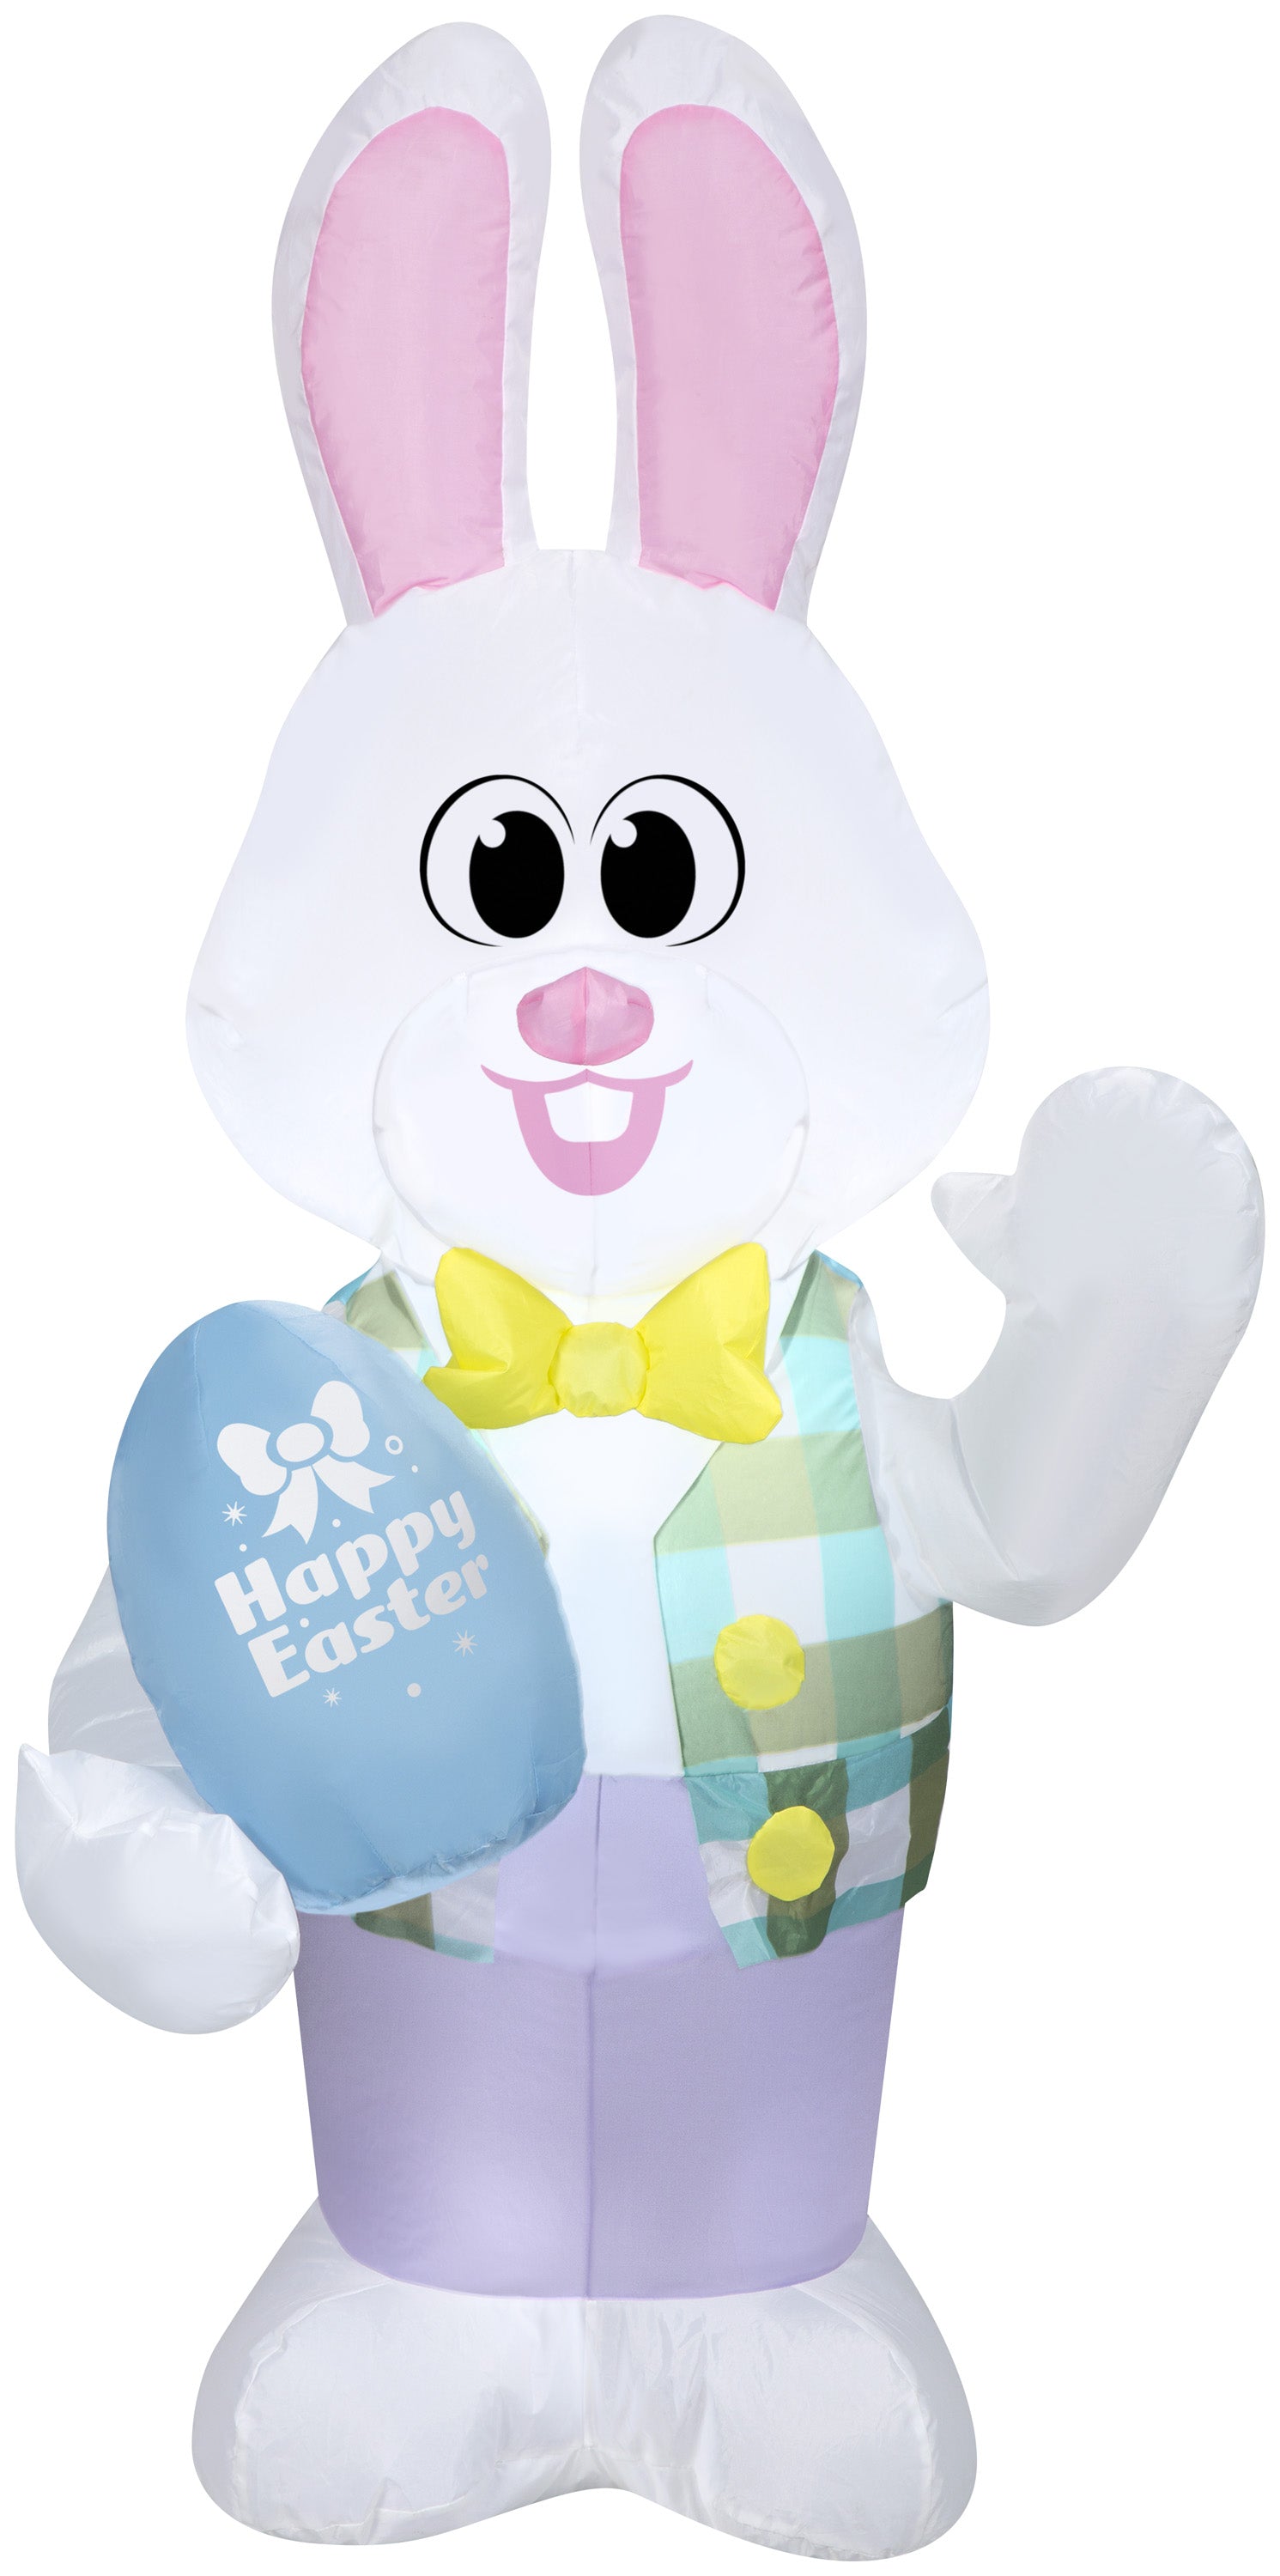 Gemmy 4 ft Airblown Easter Bunny, White